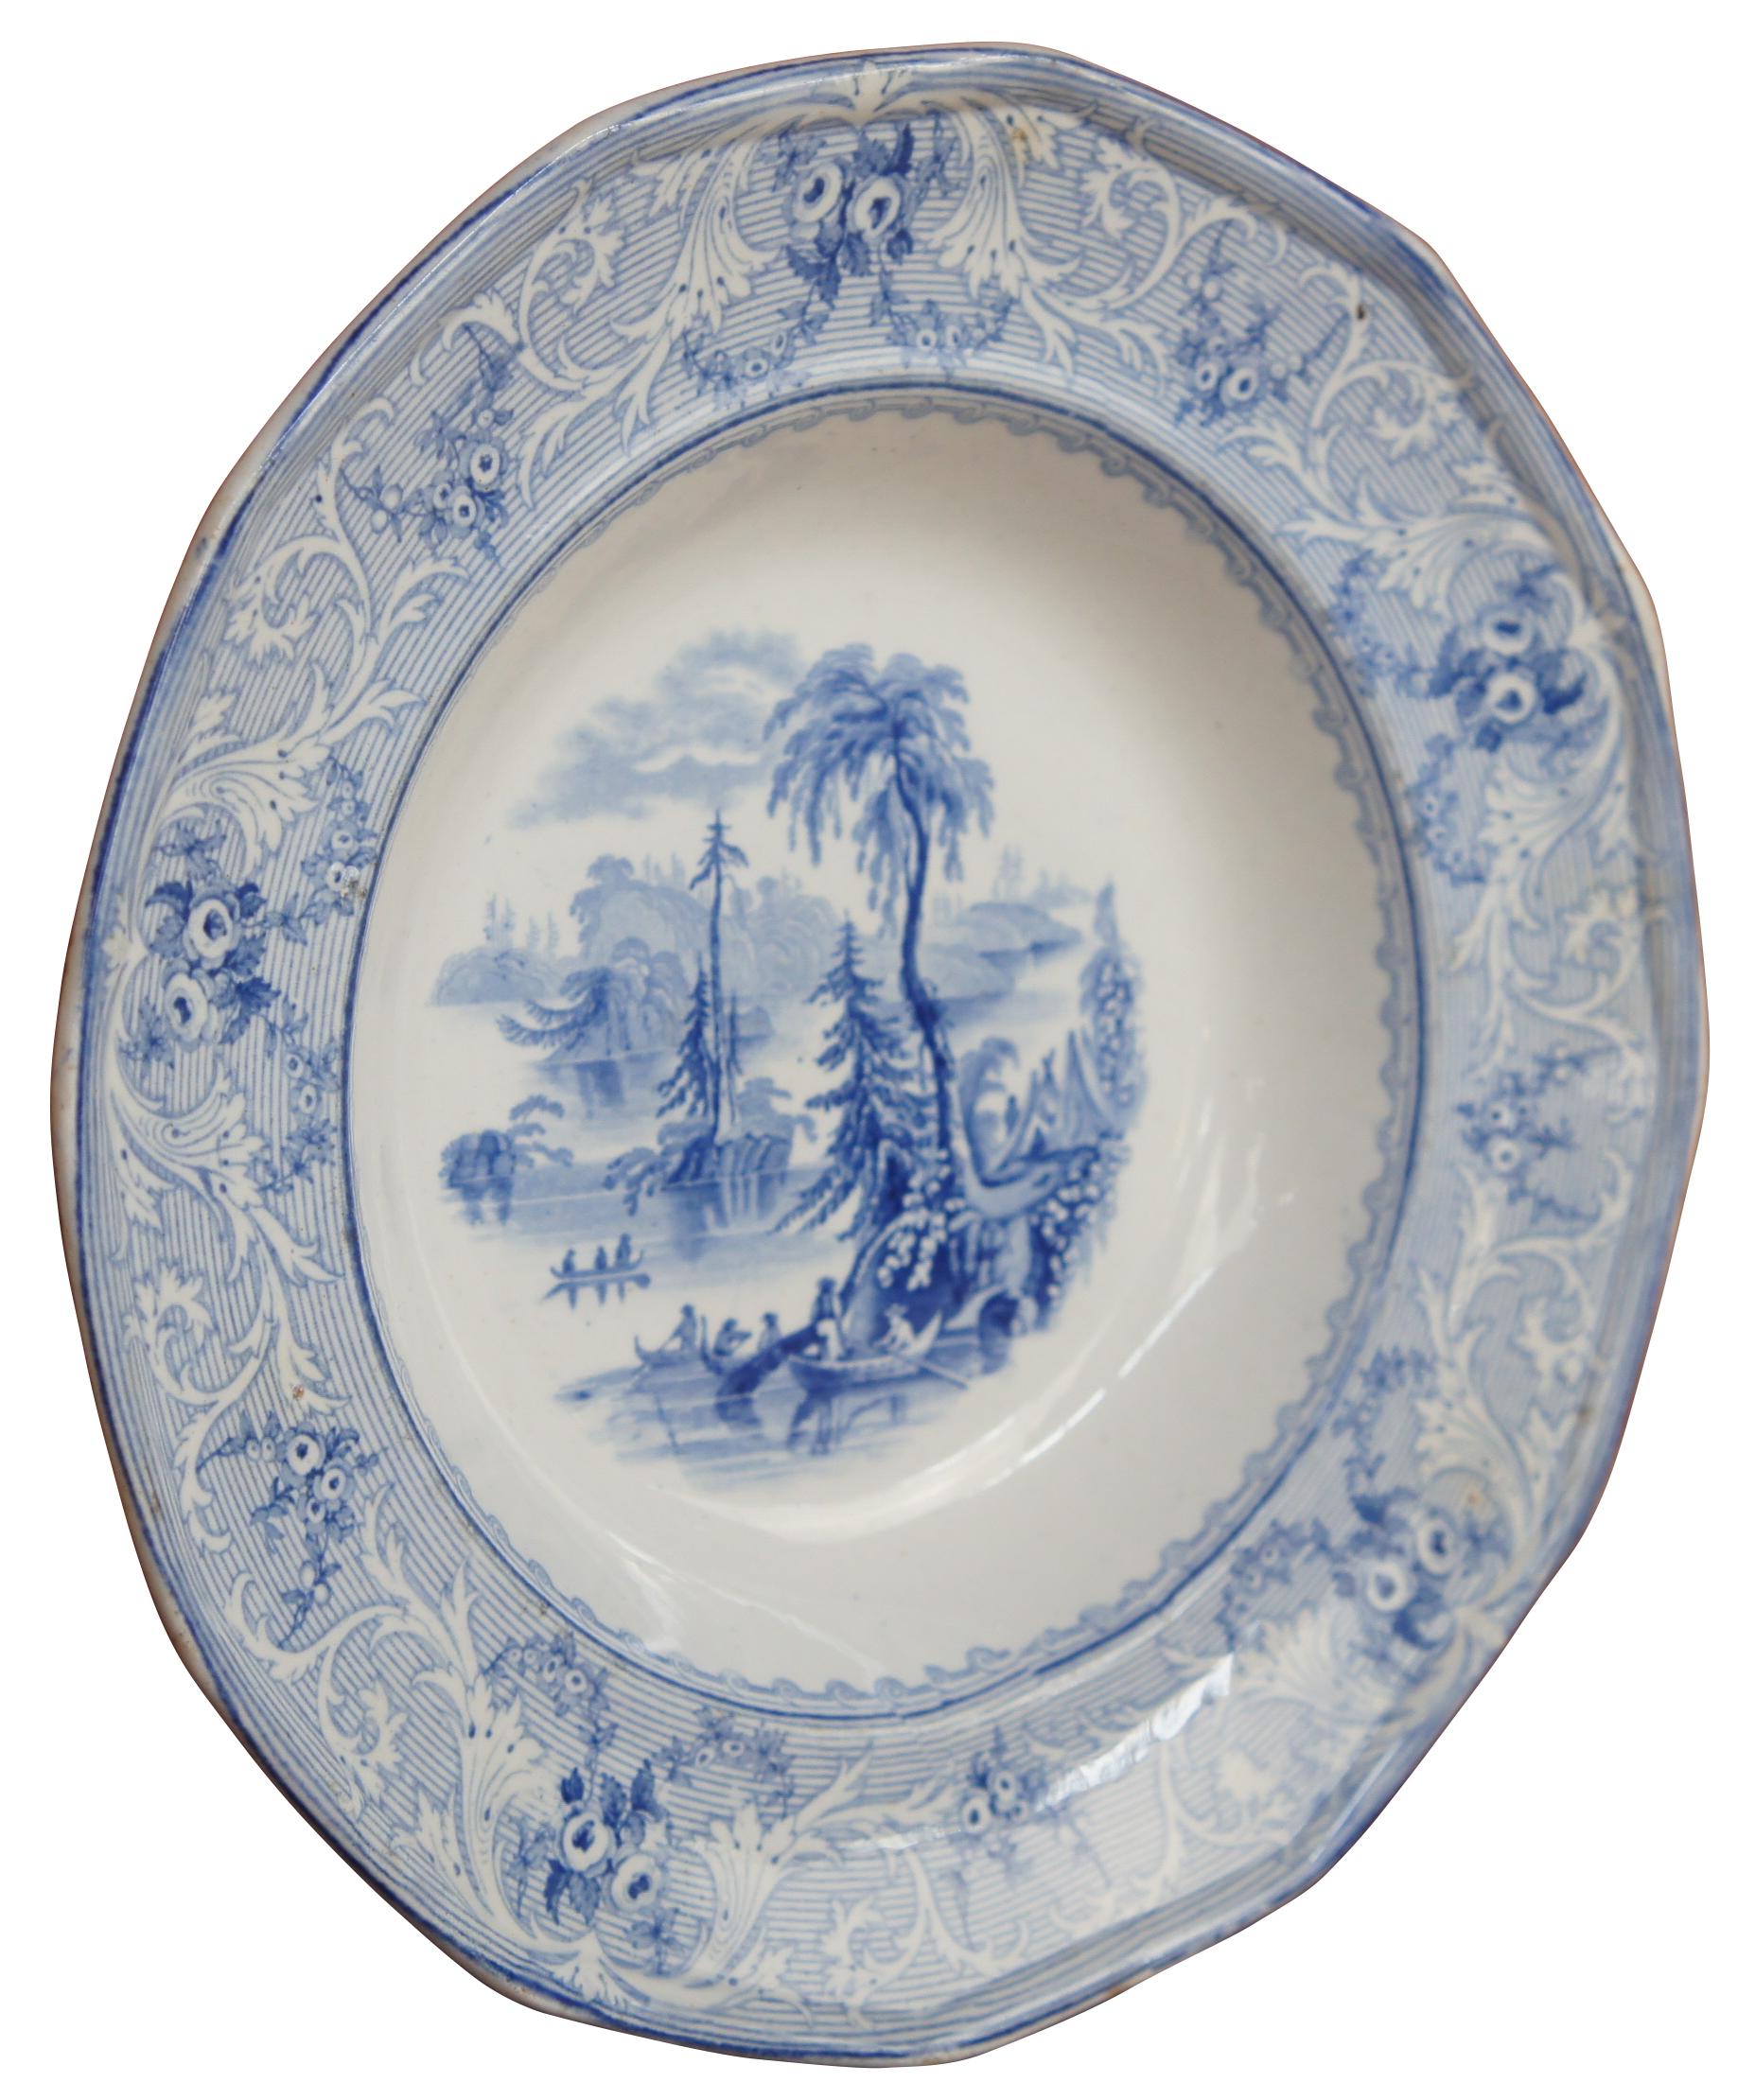 Antique 19th century English transferware shallow bowl or soup plate featuring a nautical theme with boats / fishermen / Tipi's on the lake. Measure: 9